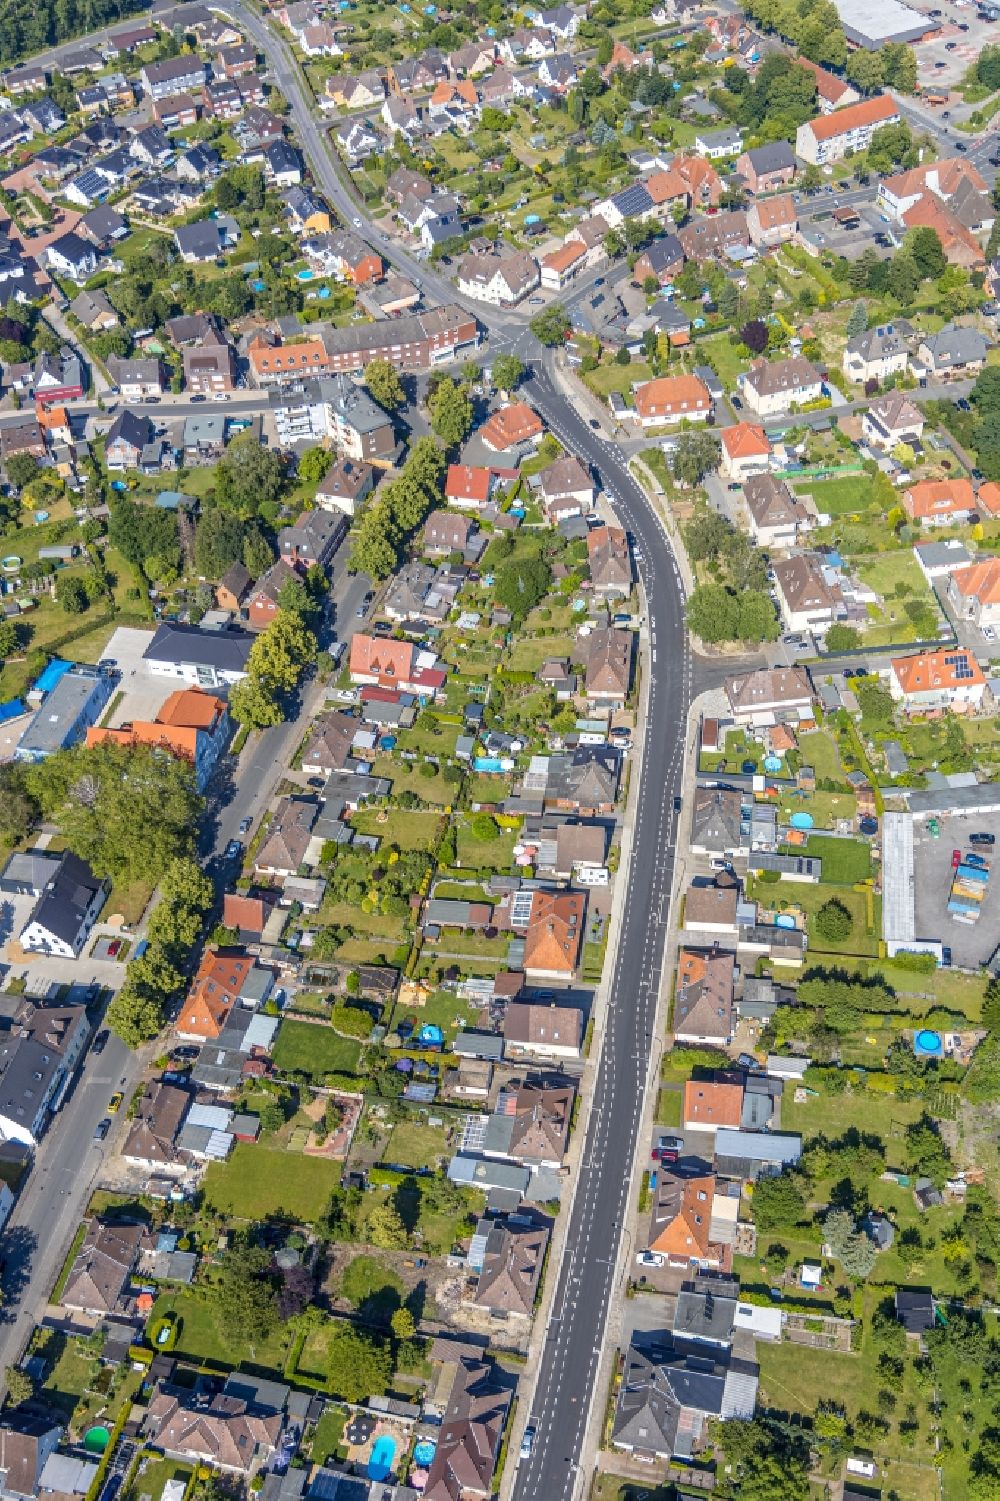 Hamm from above - Single-family residential area of settlement between Am Haemmschen and Bockelweg in the district Heessen in Hamm in the state North Rhine-Westphalia, Germany